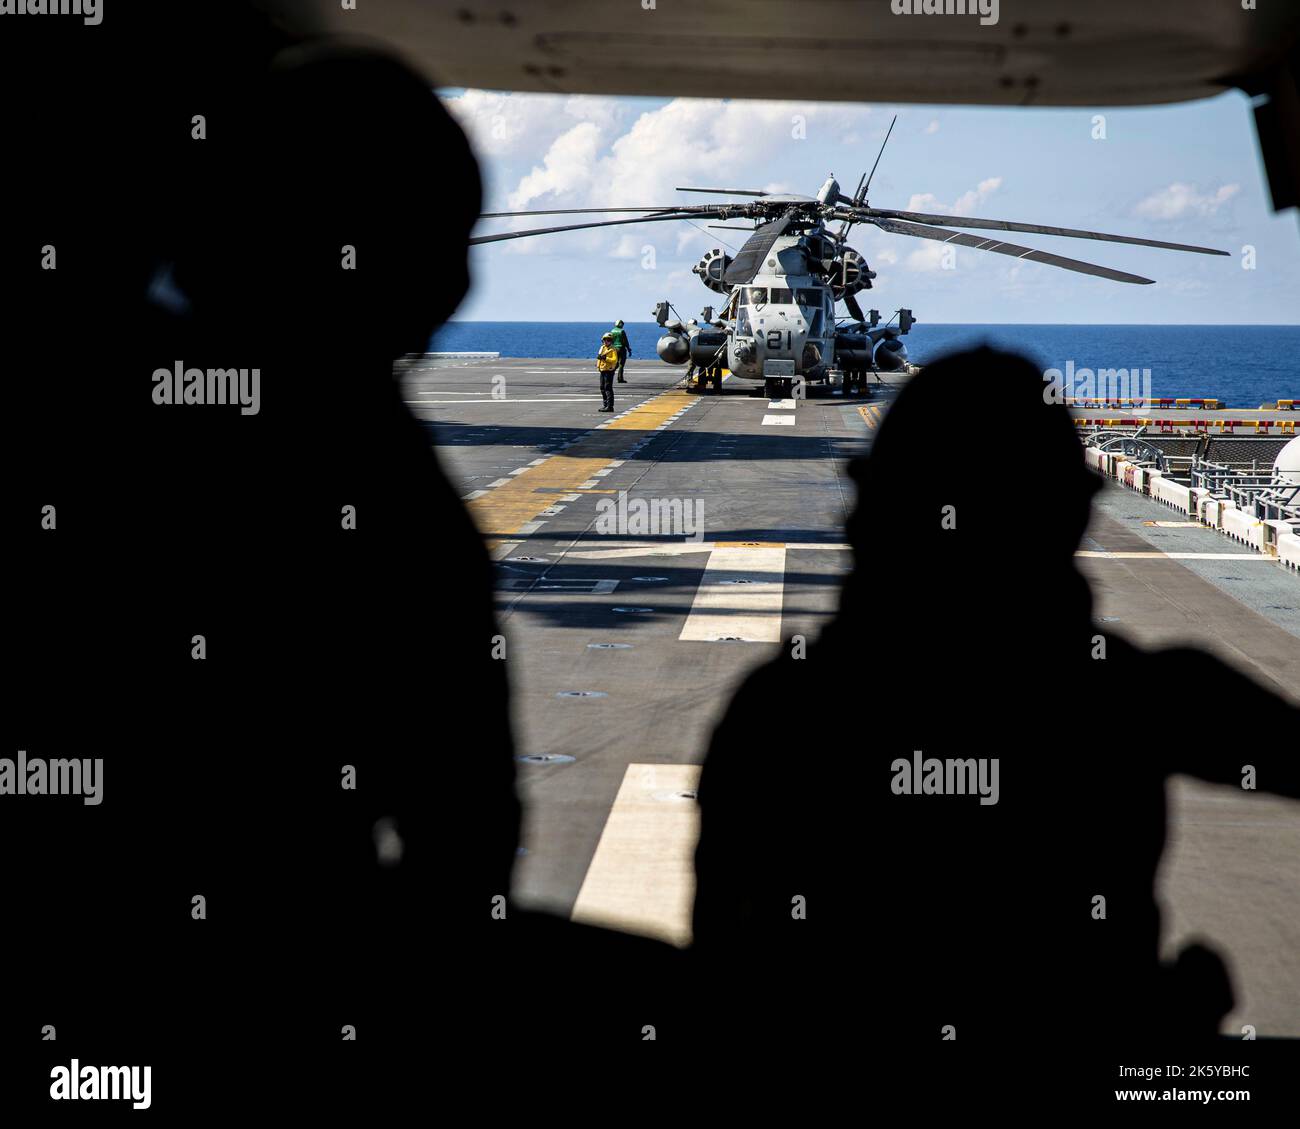 U.S. Marines with Marine Medium Tiltrotor Squadron (VMM) 262 (Rein.), 31st Marine Expeditionary Unit, prepare for flight operations inan MV-22B Osprey during KAMANDAG 6 aboard Amphibious Assault Ship USS Tripoli (LHA-7), off the coast of the Philippines, Oct. 2, 2022.  KAMANDAG is an annual bilateral exercise between the Armed Forces of the Philippines and U.S. military designed to strengthen interoperability, capabilities, trust, and cooperation built over decades shared experiences. (U.S. Marine Corps photo by Sgt. Danny Gonzalez) Stock Photo